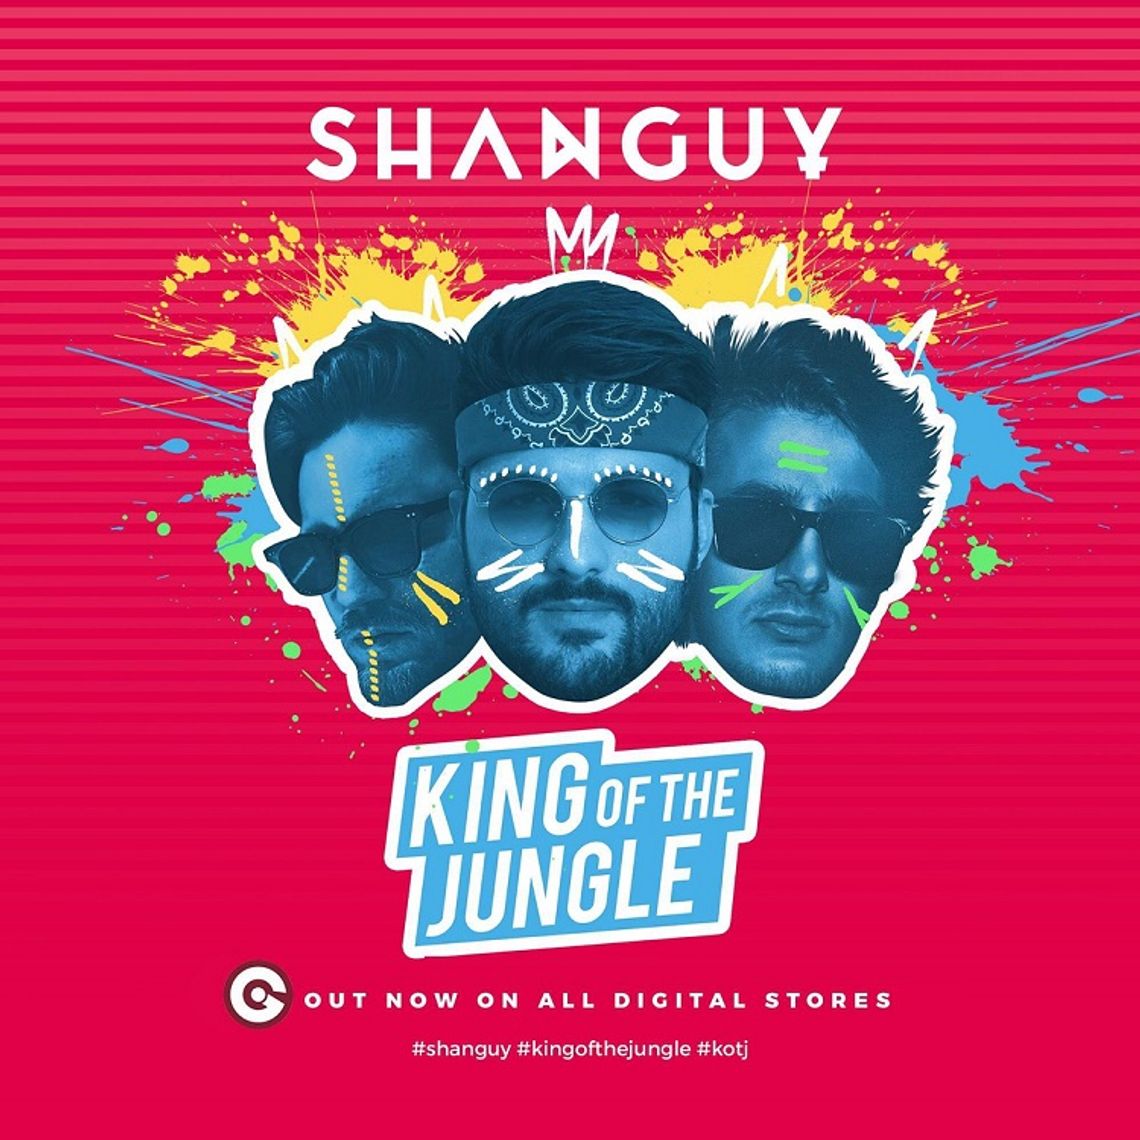 Shanguy - "King of the jungle"